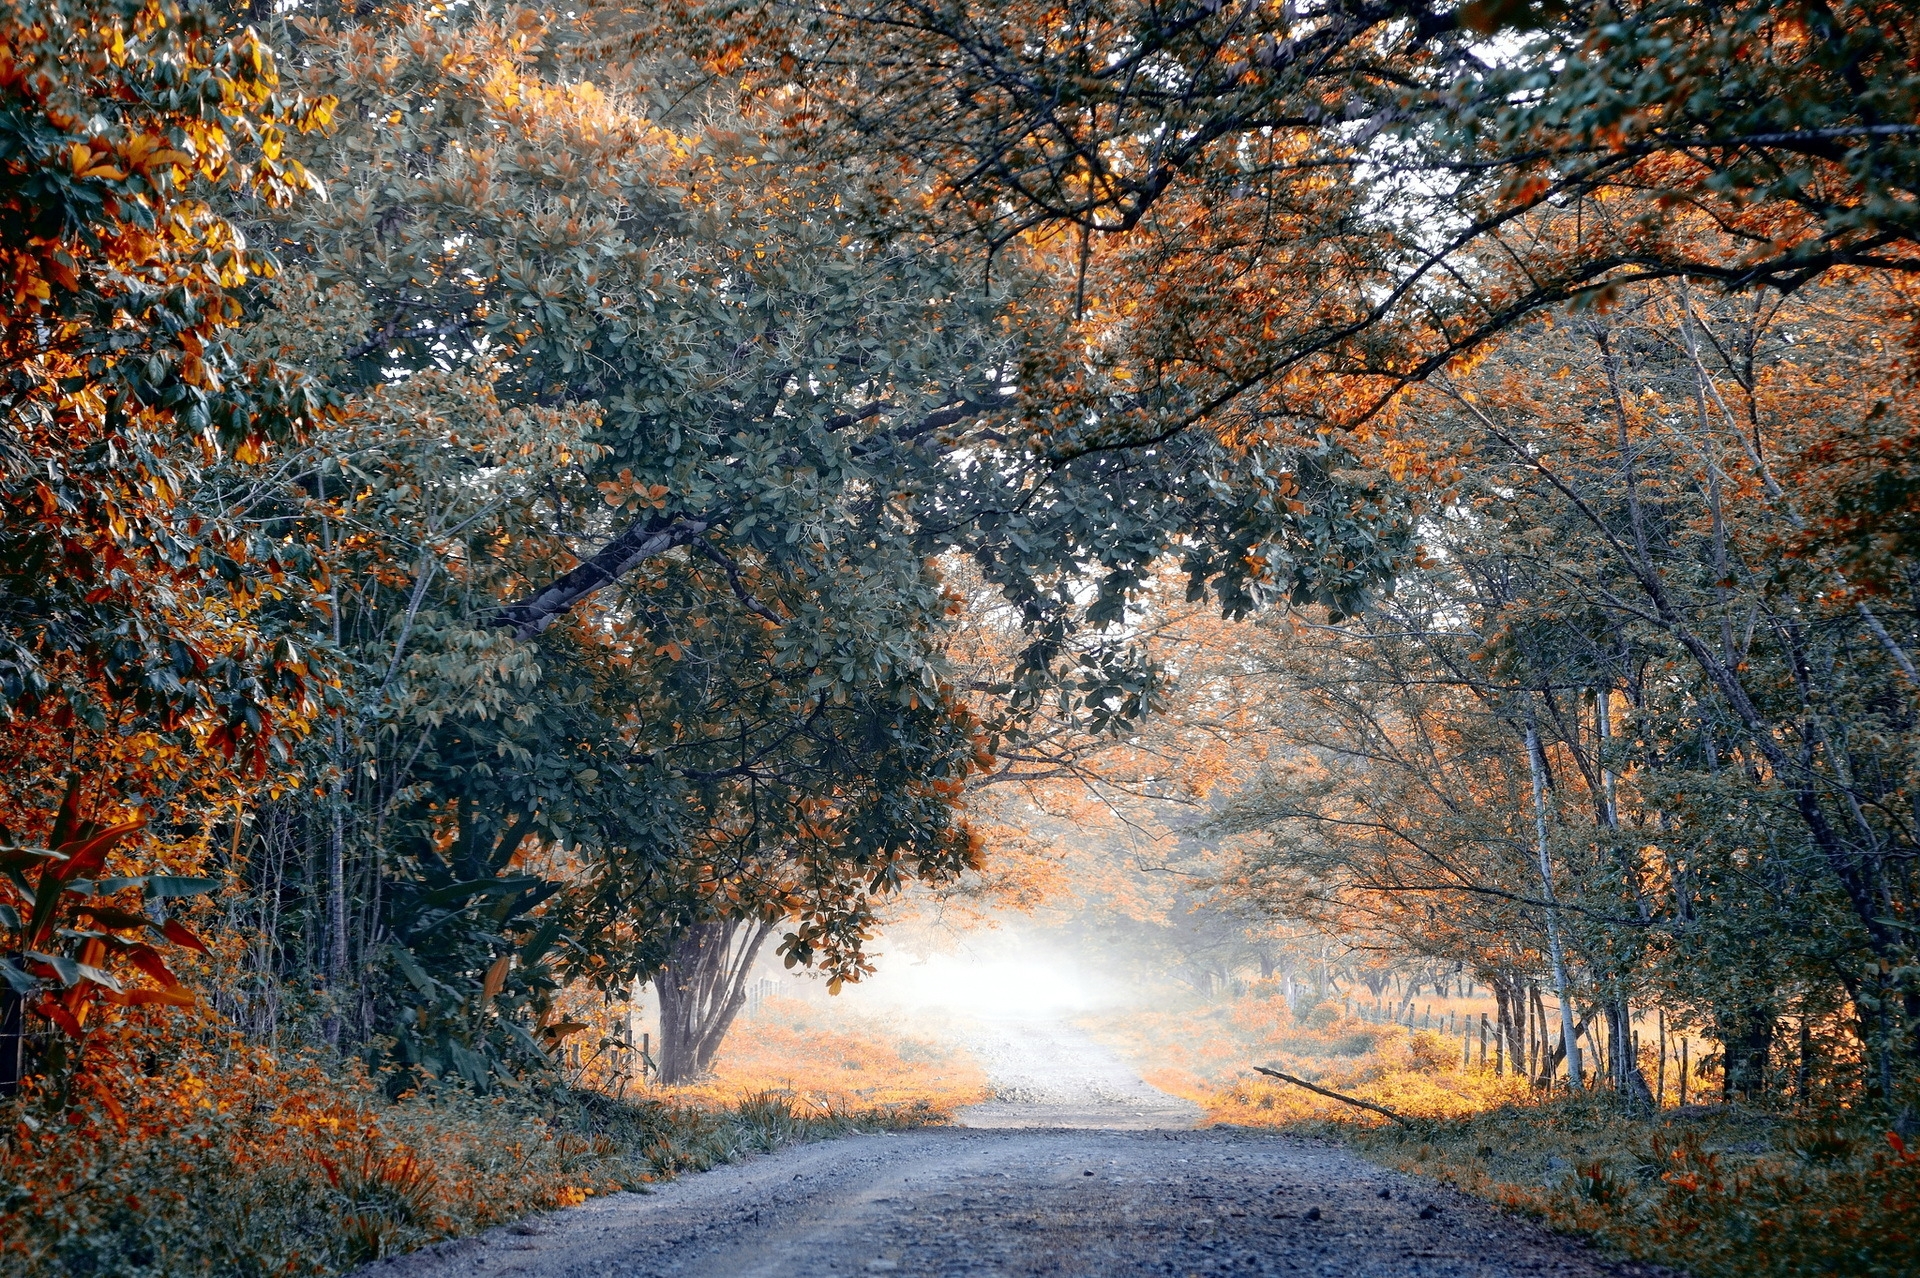 Picture of a dirt road in the fall woods